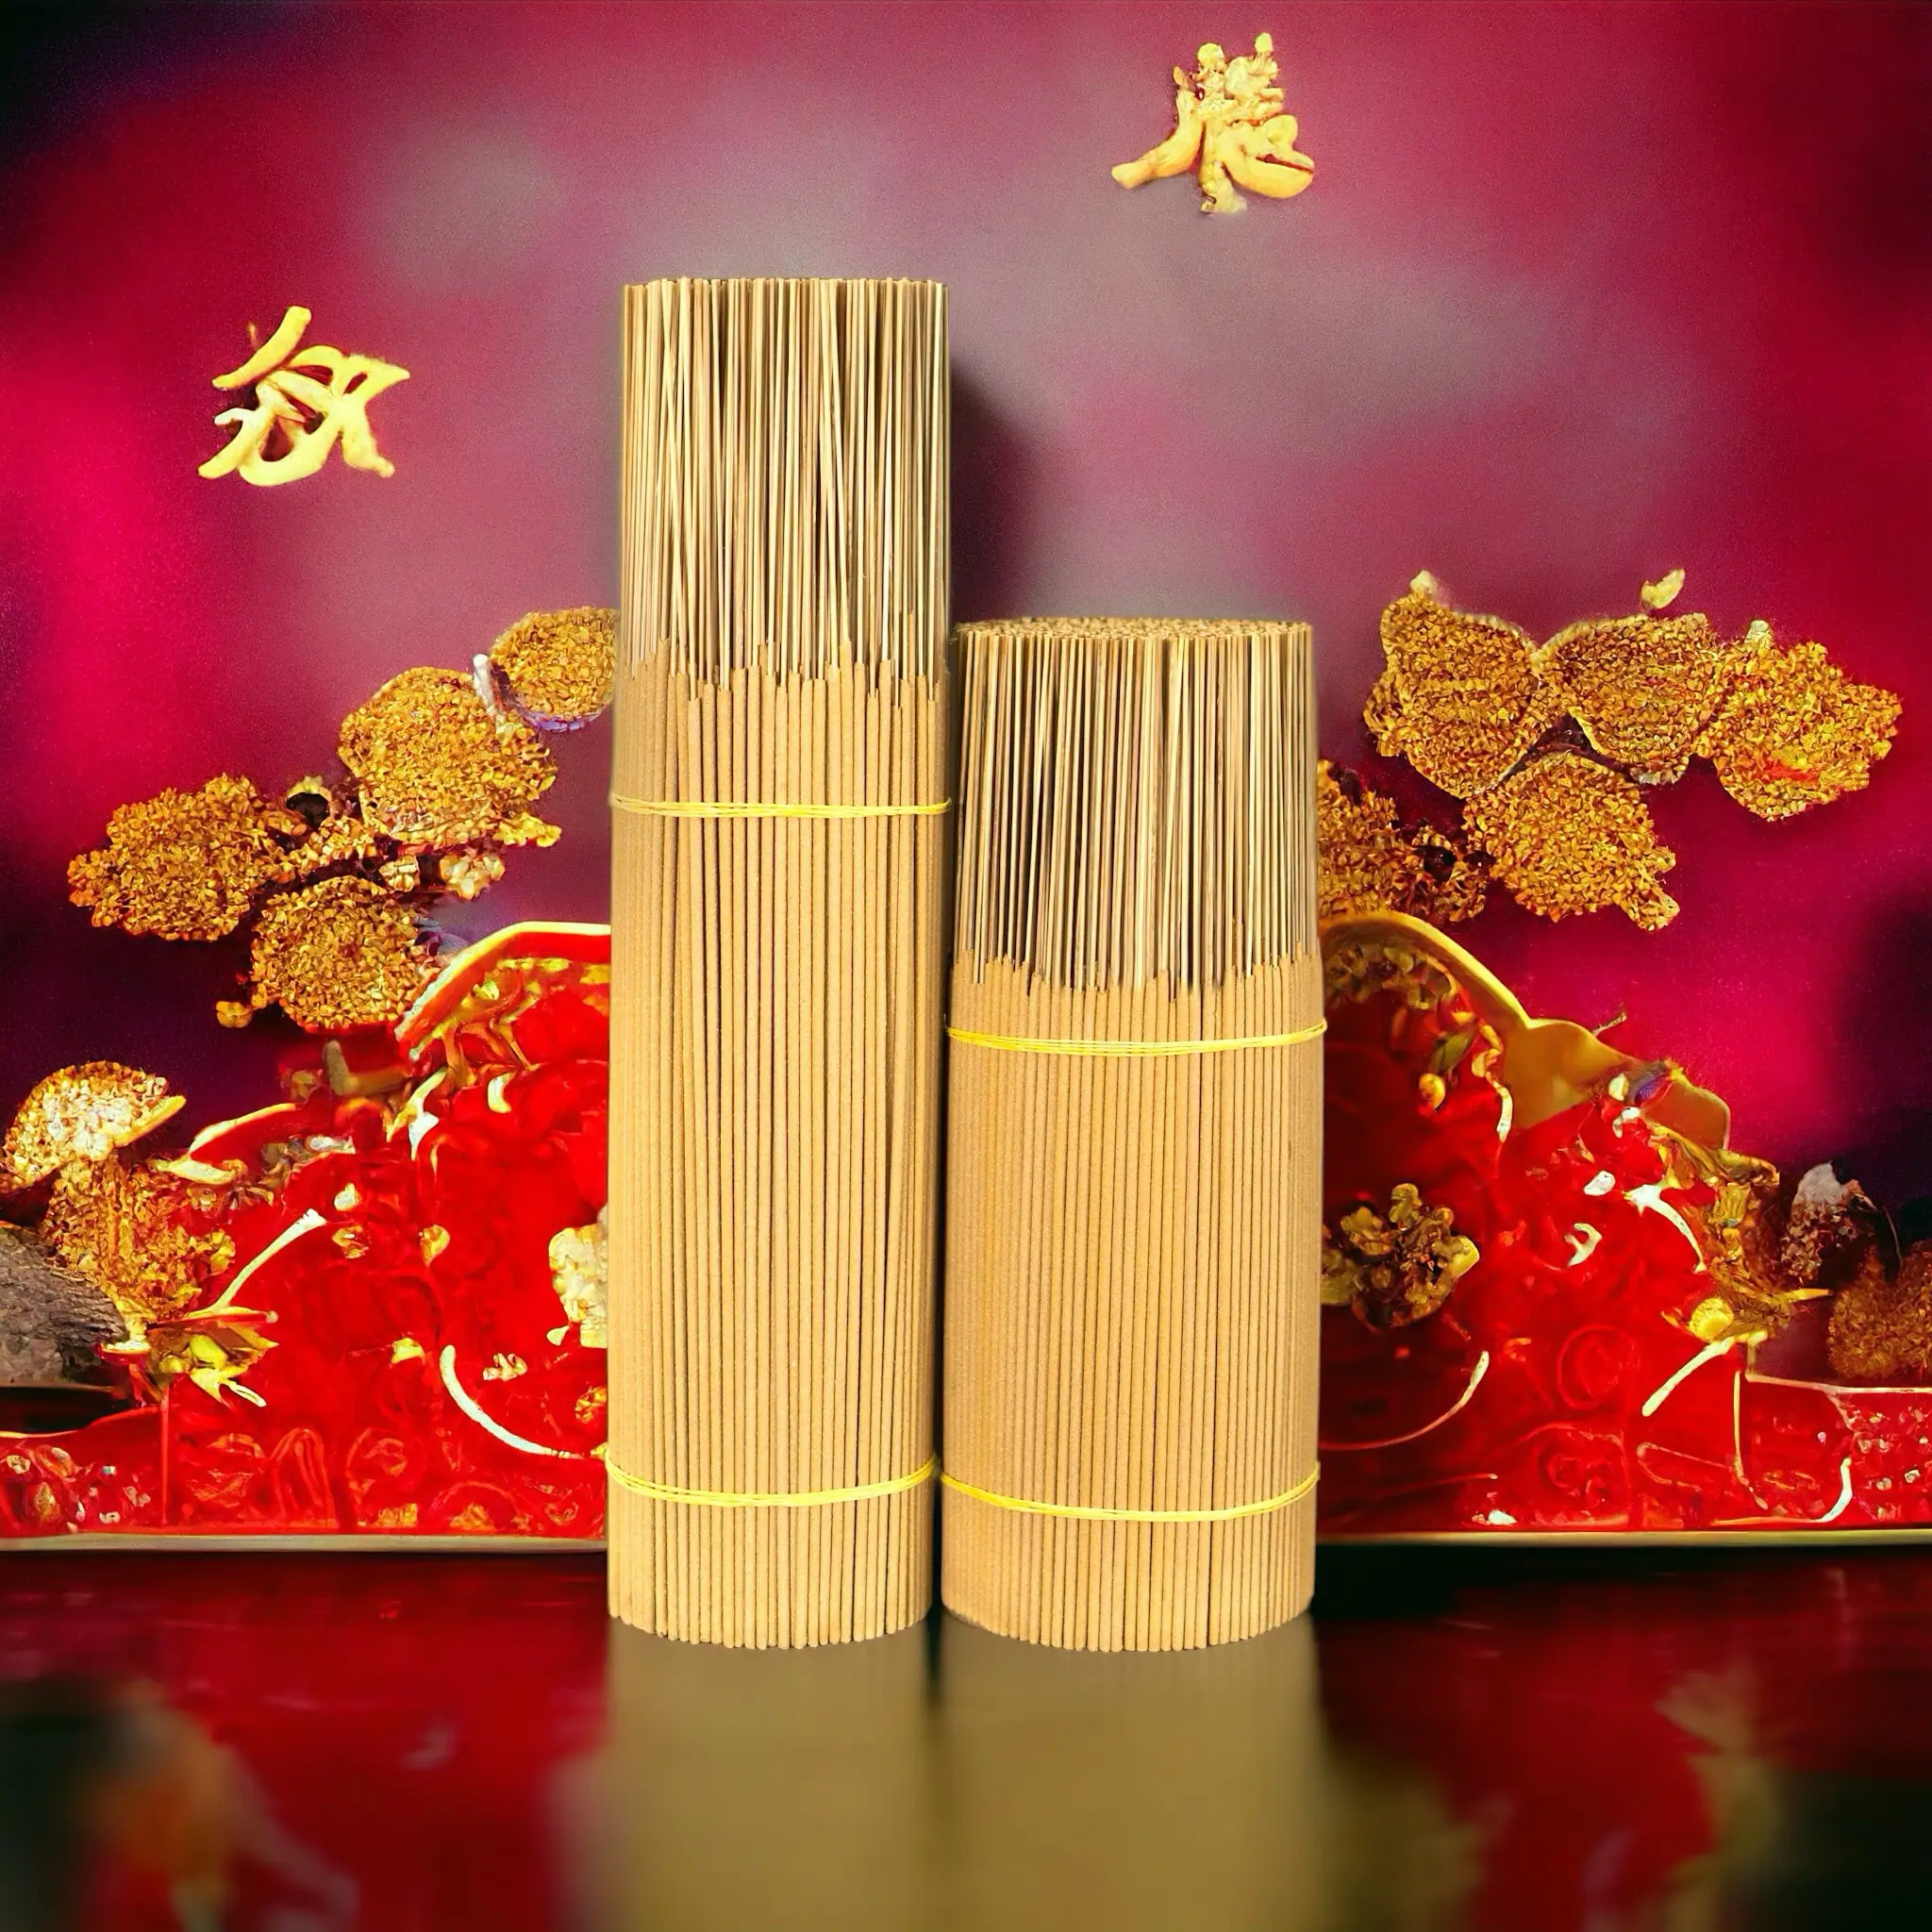 Wholesale Price Agarwood incense stick from Vietnam factory whatsapp +84 373635126